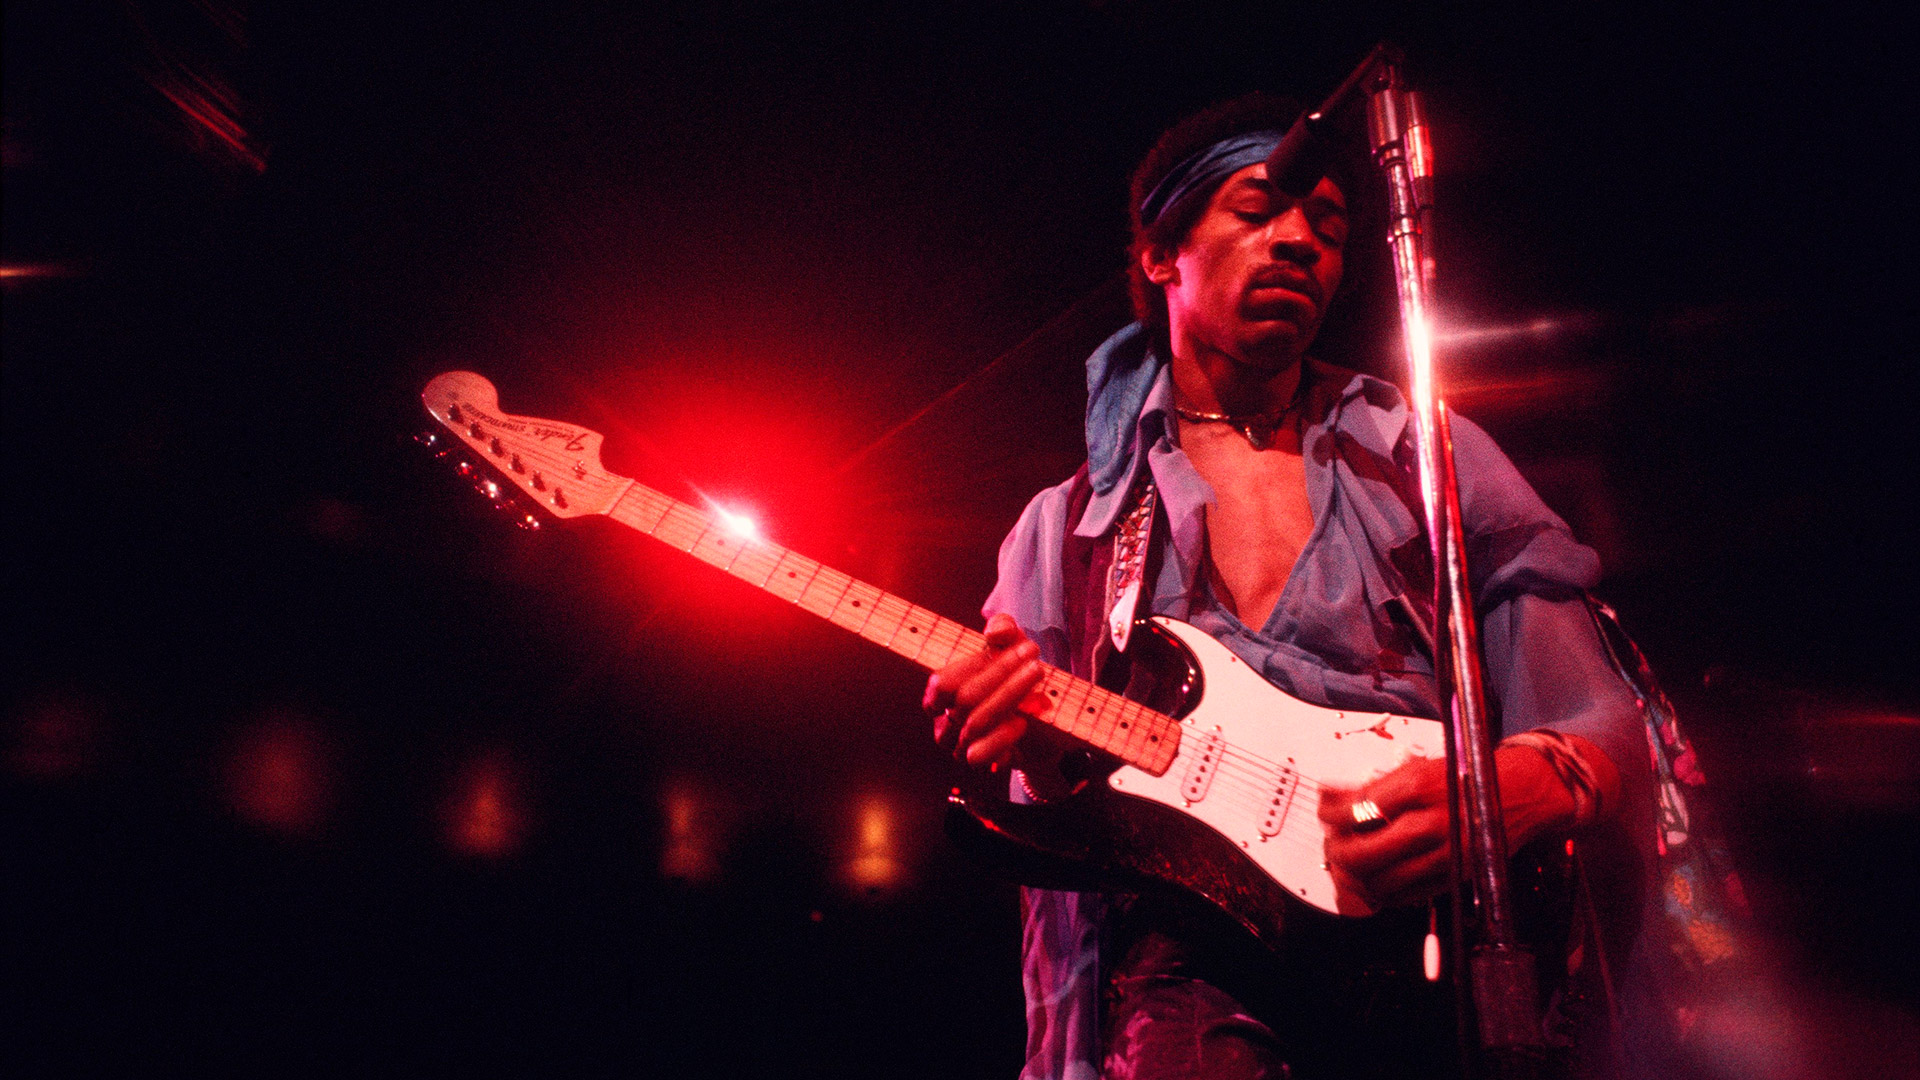 Jimi Hendrix performing at Madison Square Garden in New York in 1969. (Photo Walter Iooss Jr./Getty Images)